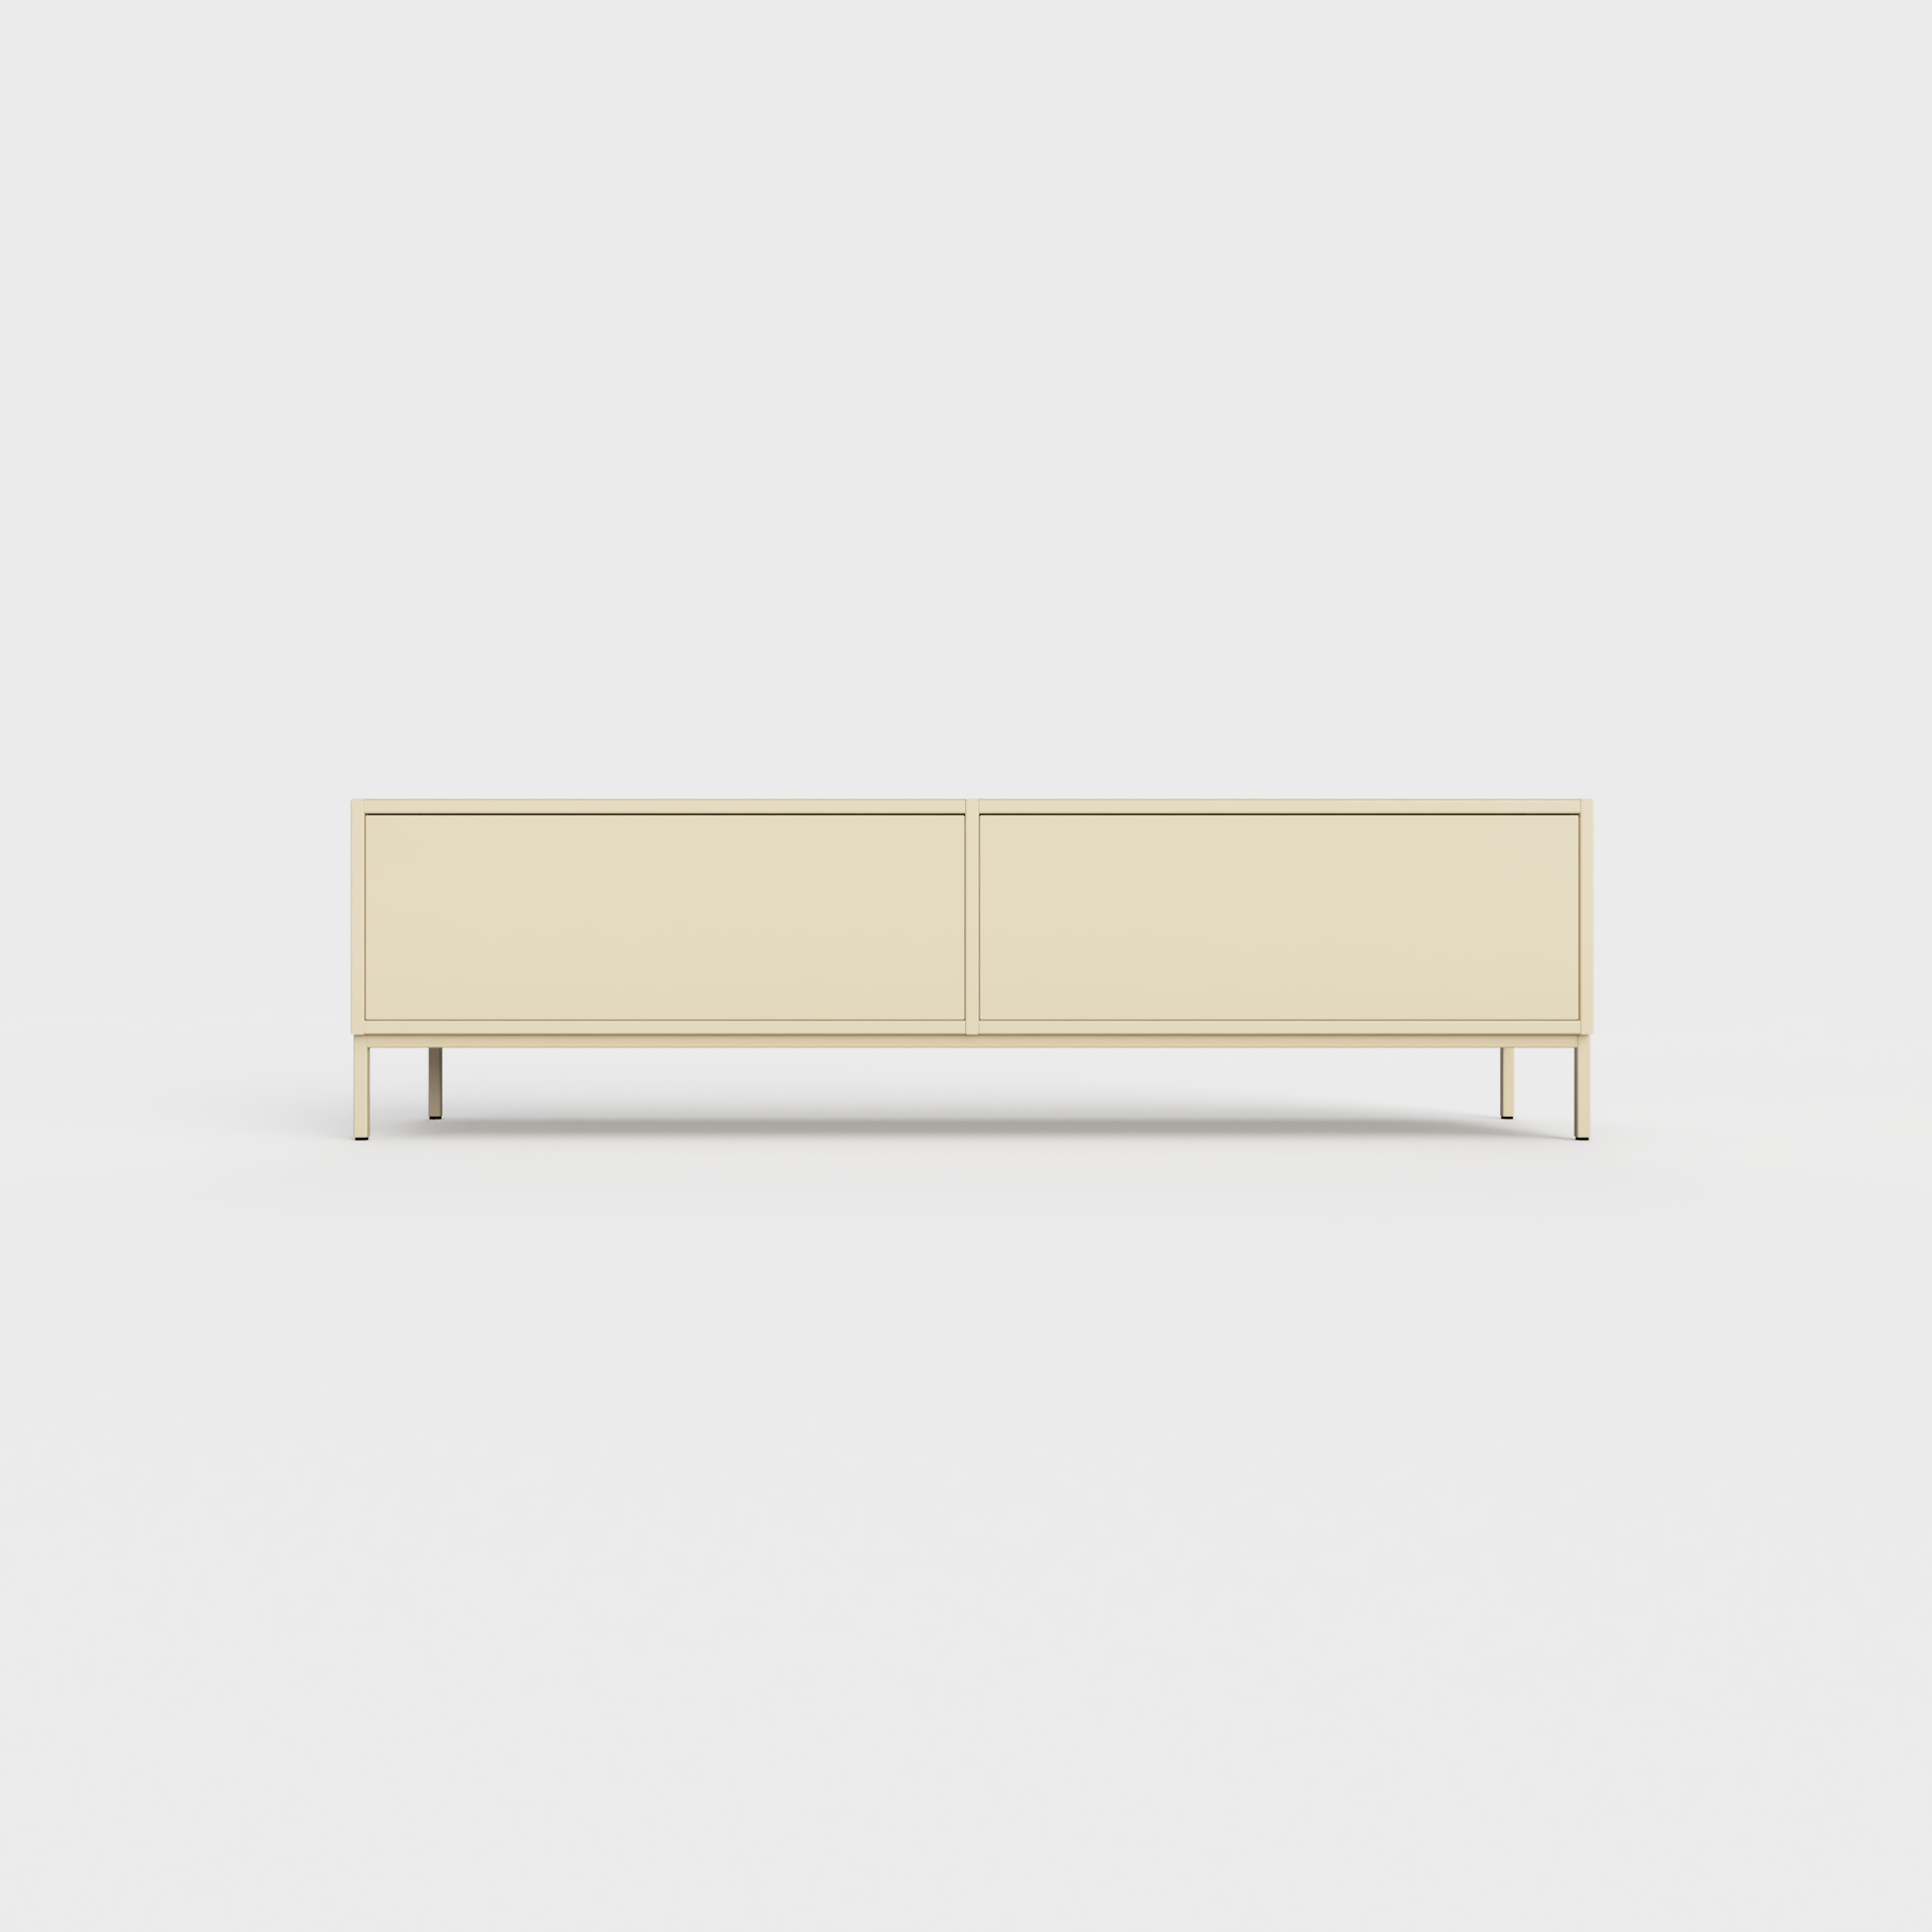 Prunus 01 Lowboard in Sand color, powder-coated steel, elegant and modern piece of furniture for your living room